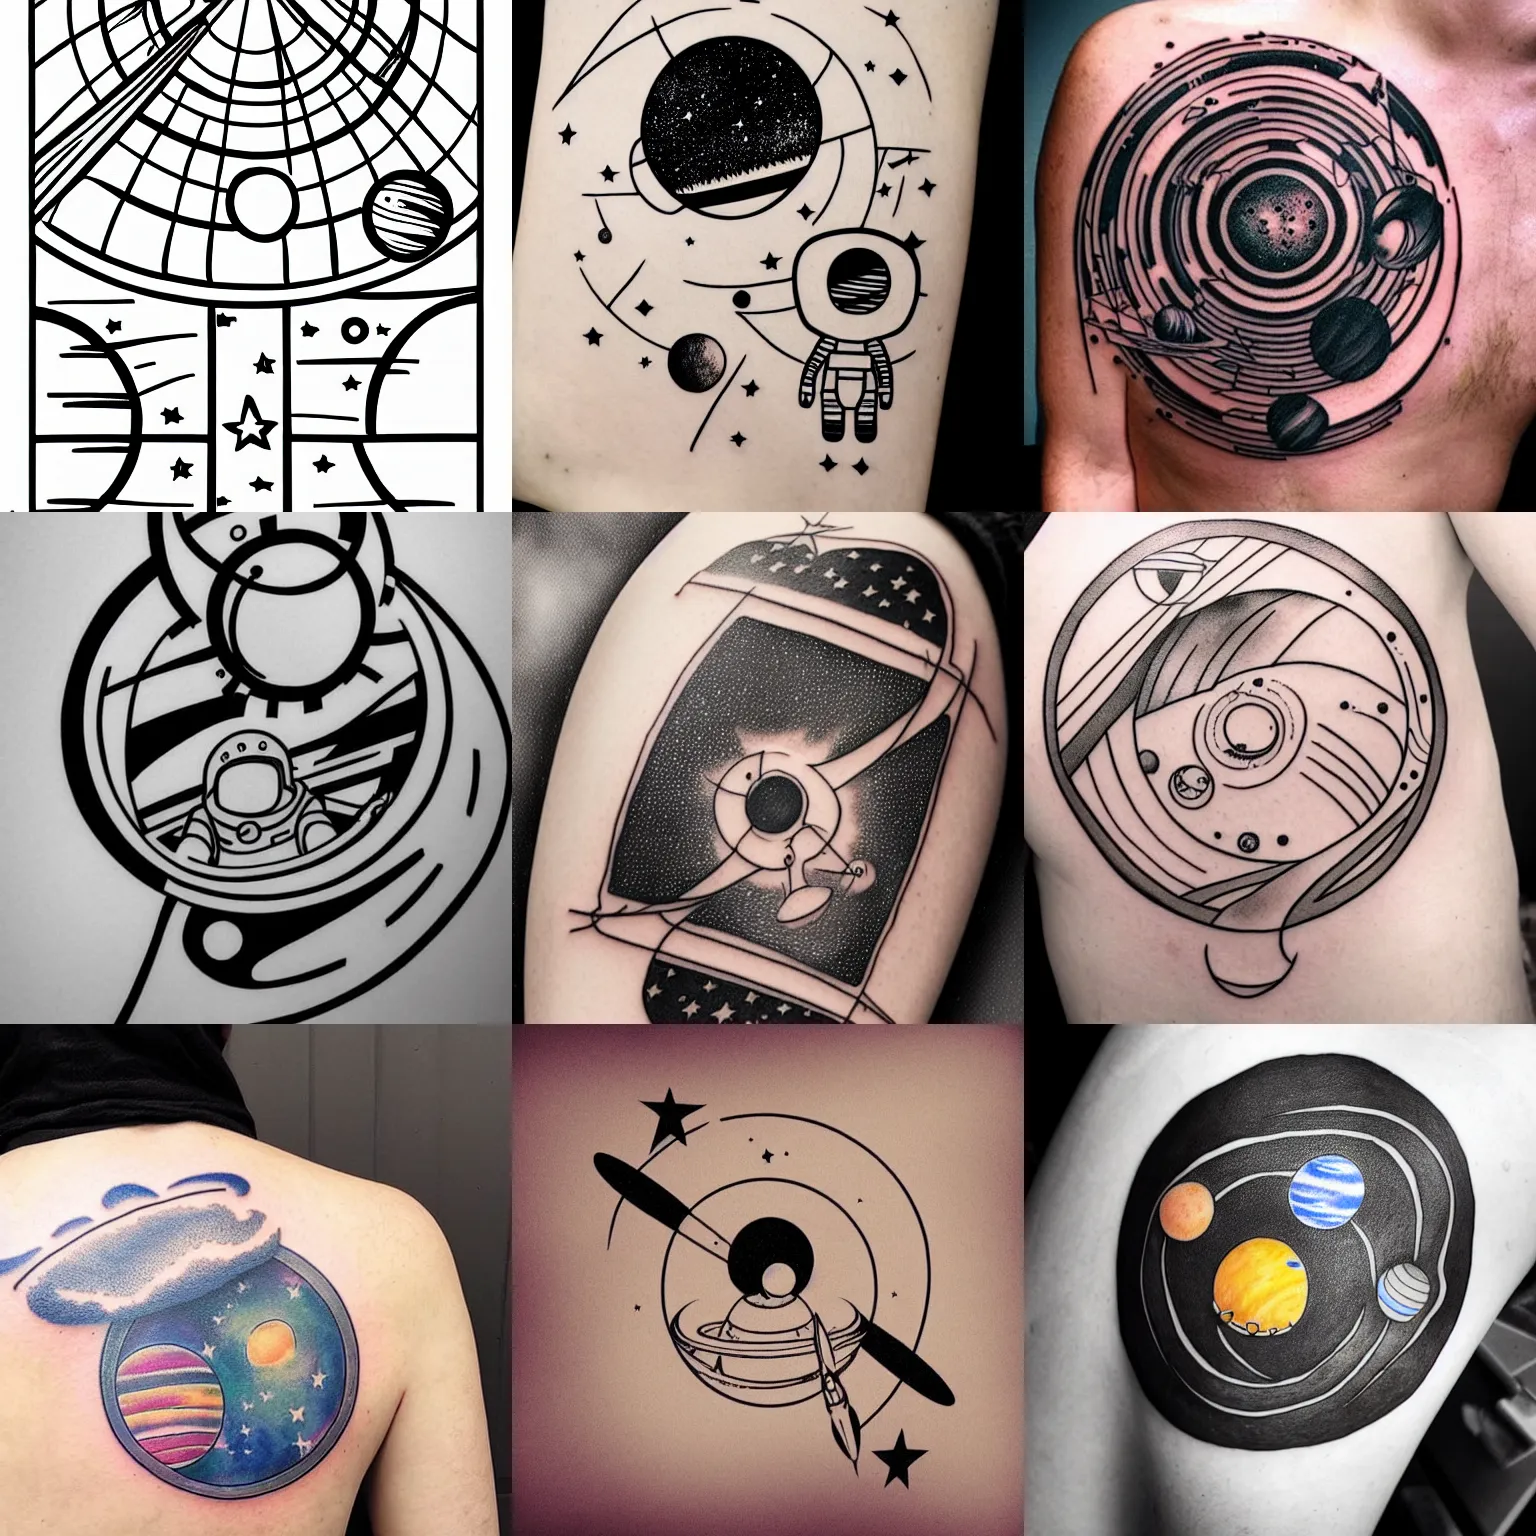 I see your minimalist solar system tattoos and raise you my artistic  interpretation, with Pluto : r/space